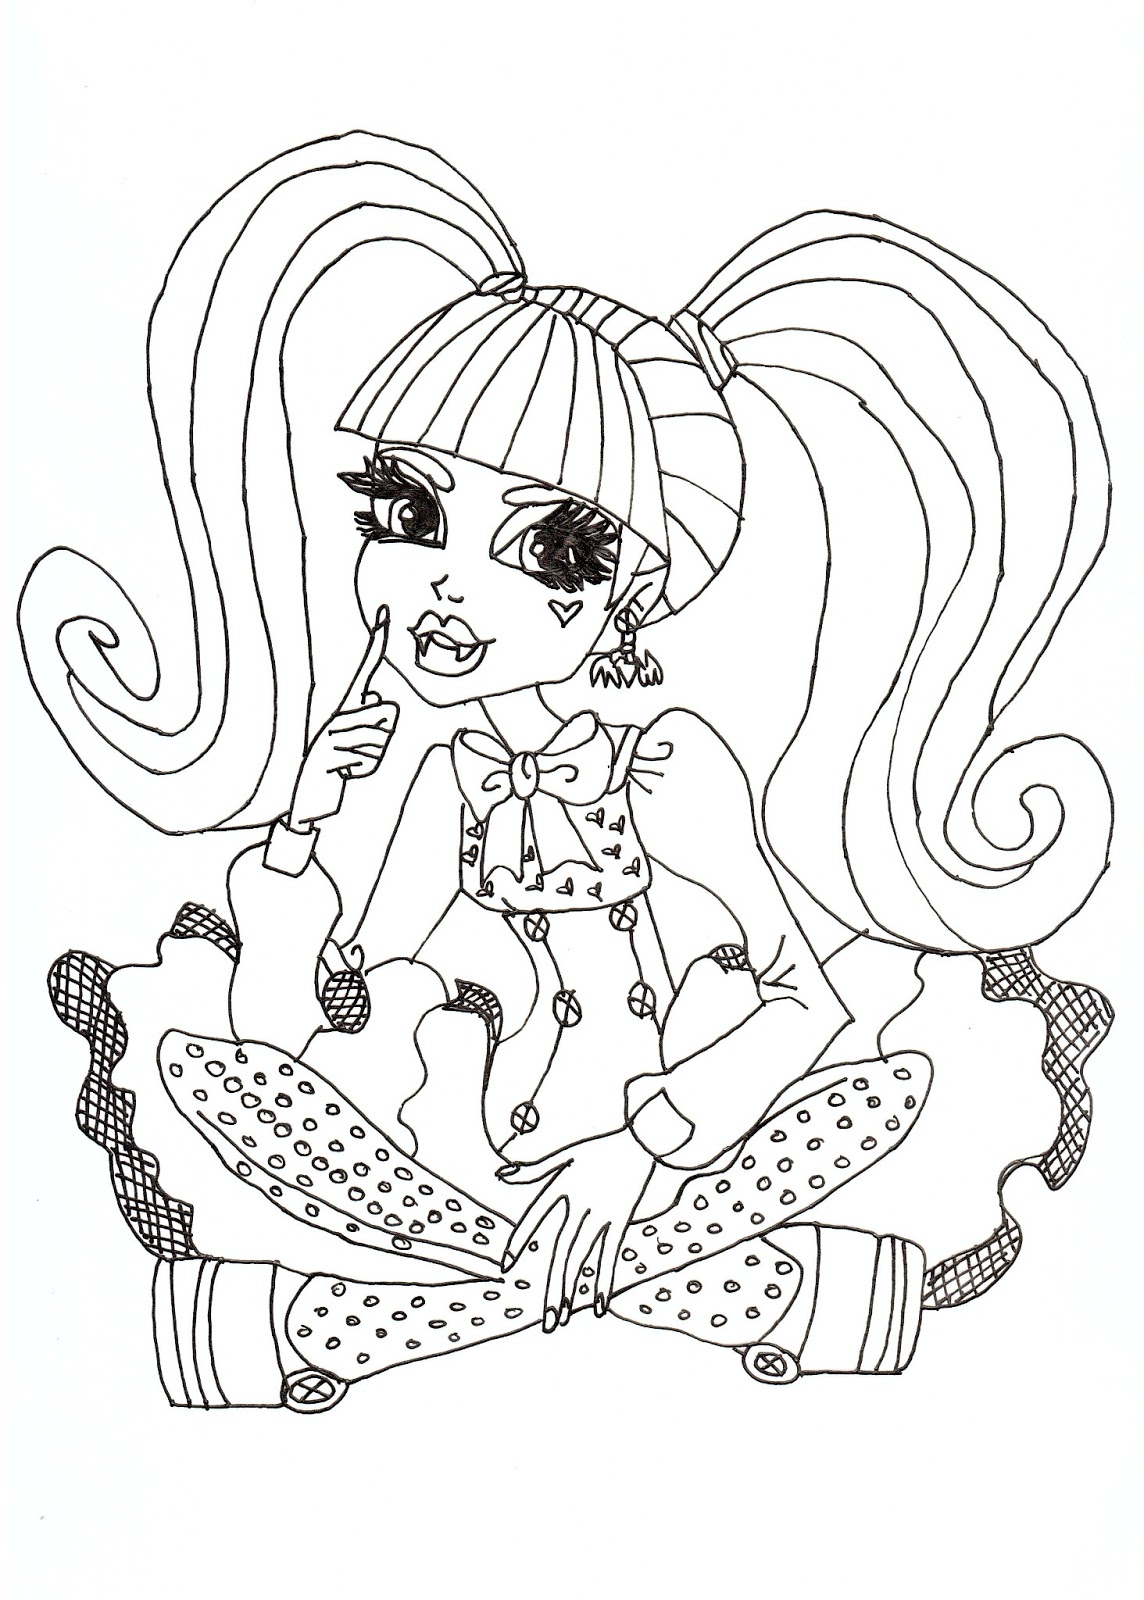 free-printable-monster-high-coloring-pages-monster-high-draculaura